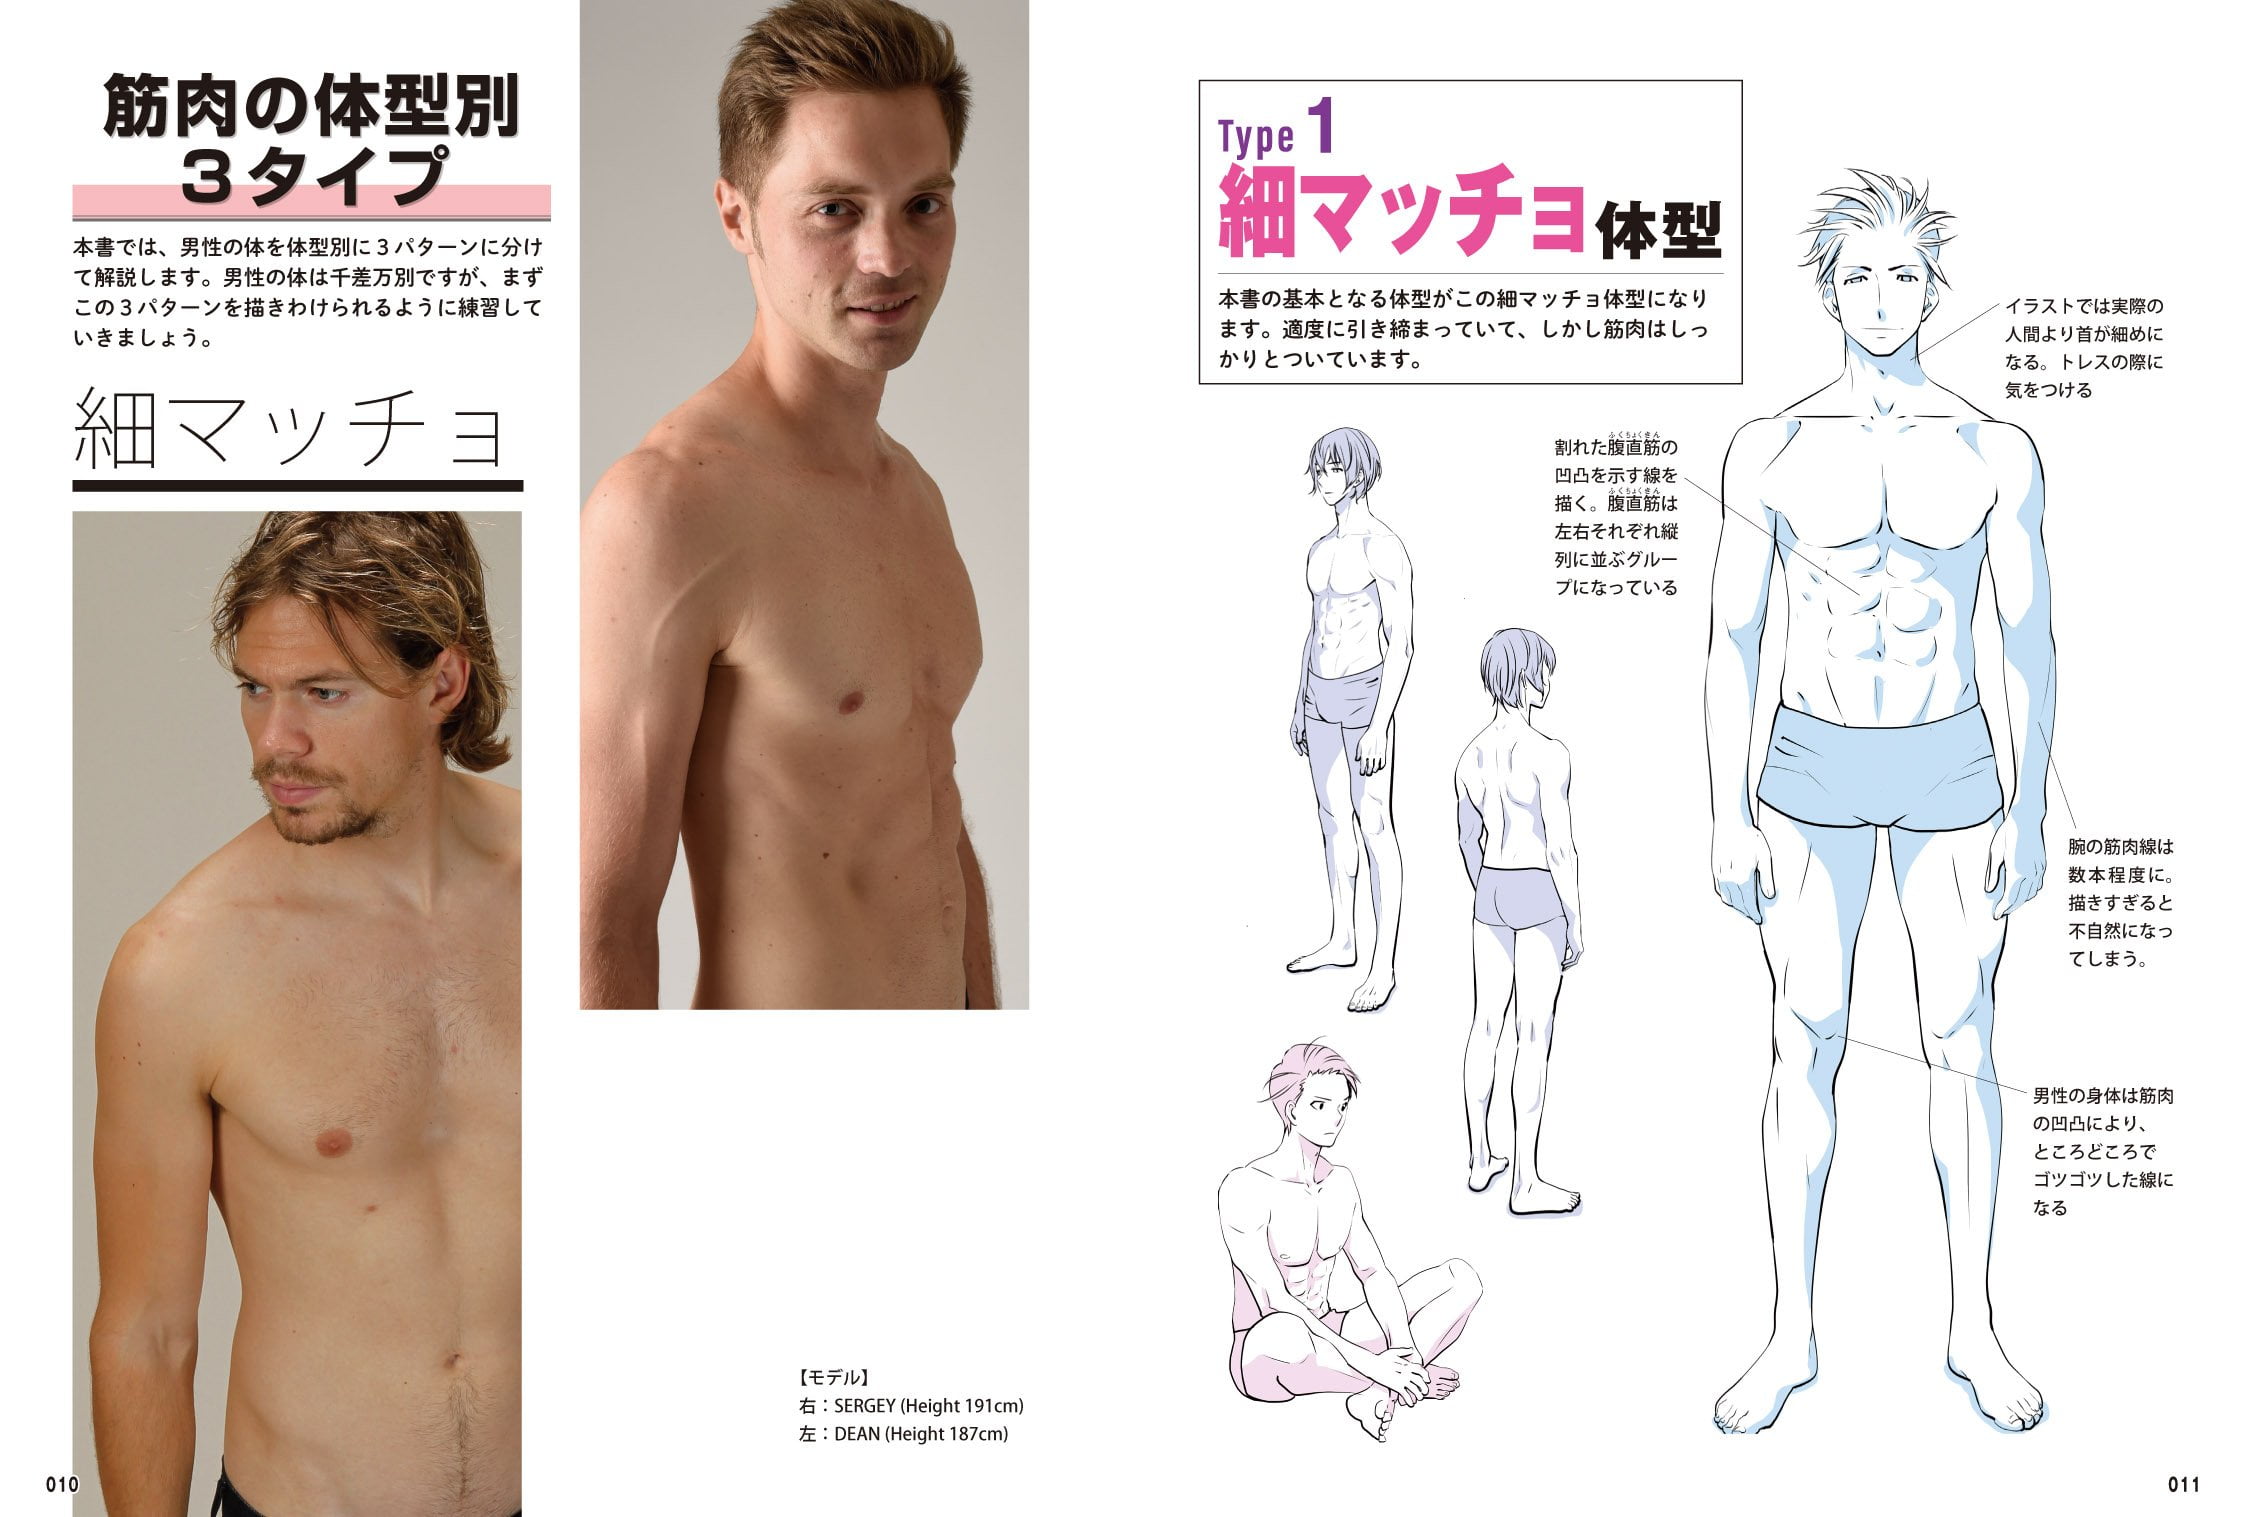 How To Draw Manga Anime Men S Muscle Technique Book Pose Collection From Slim To Macho 男の筋肉 描きわけポーズ集 スリムからマッチョまで Walmart Com